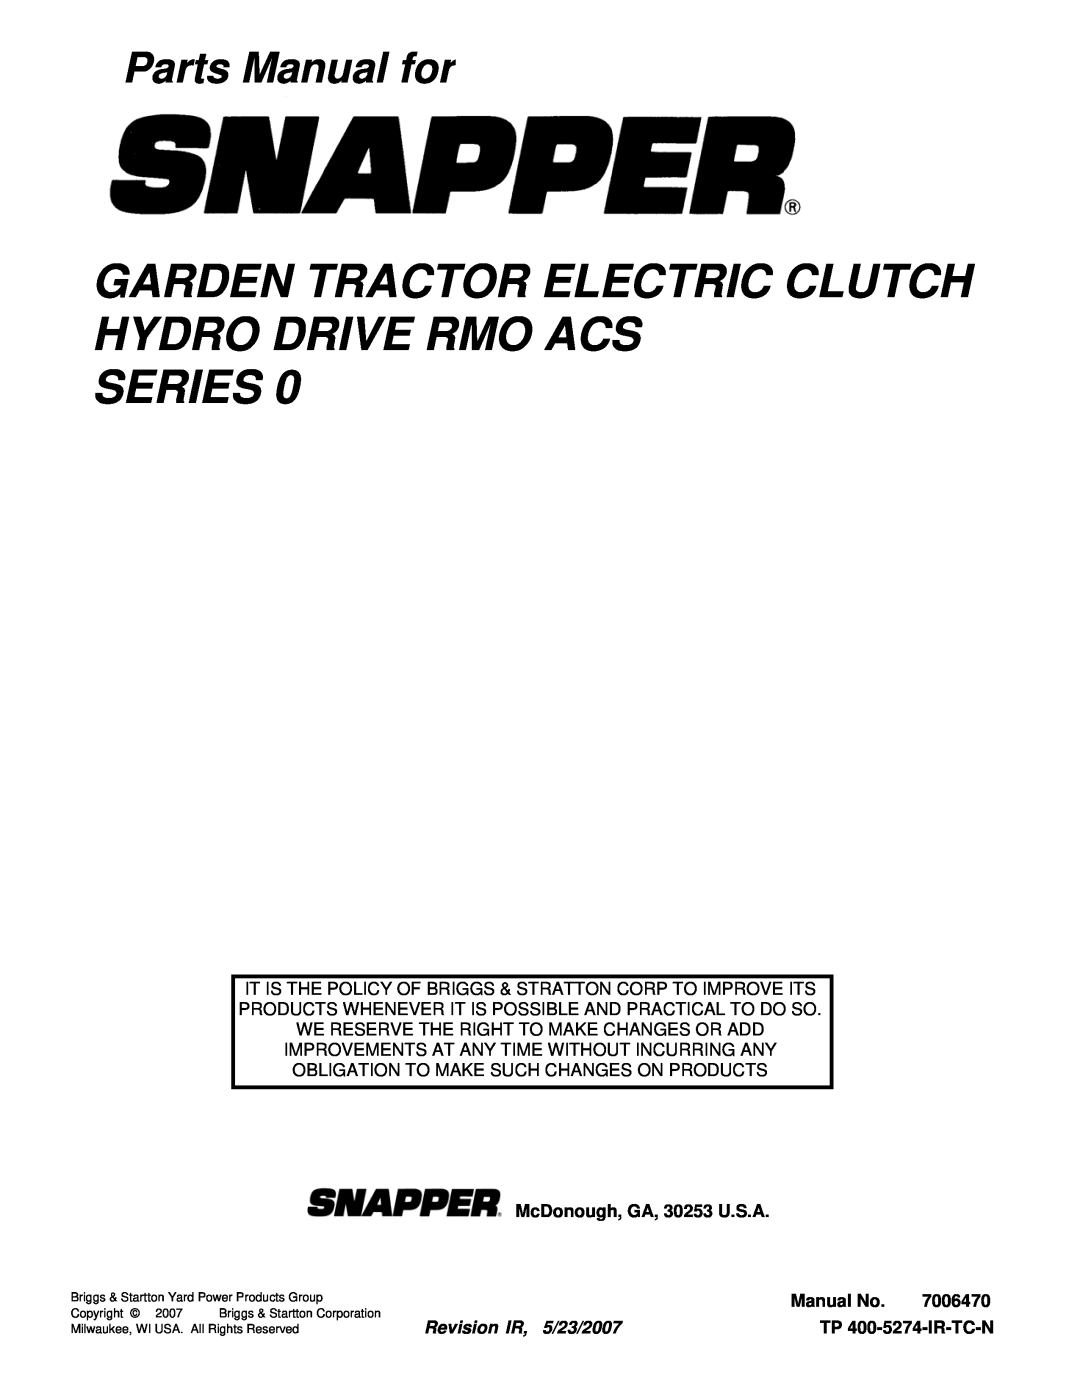 Snapper GT255400 (2690630) manual Series, Parts Manual for, Revision IR, 5/23/2007 